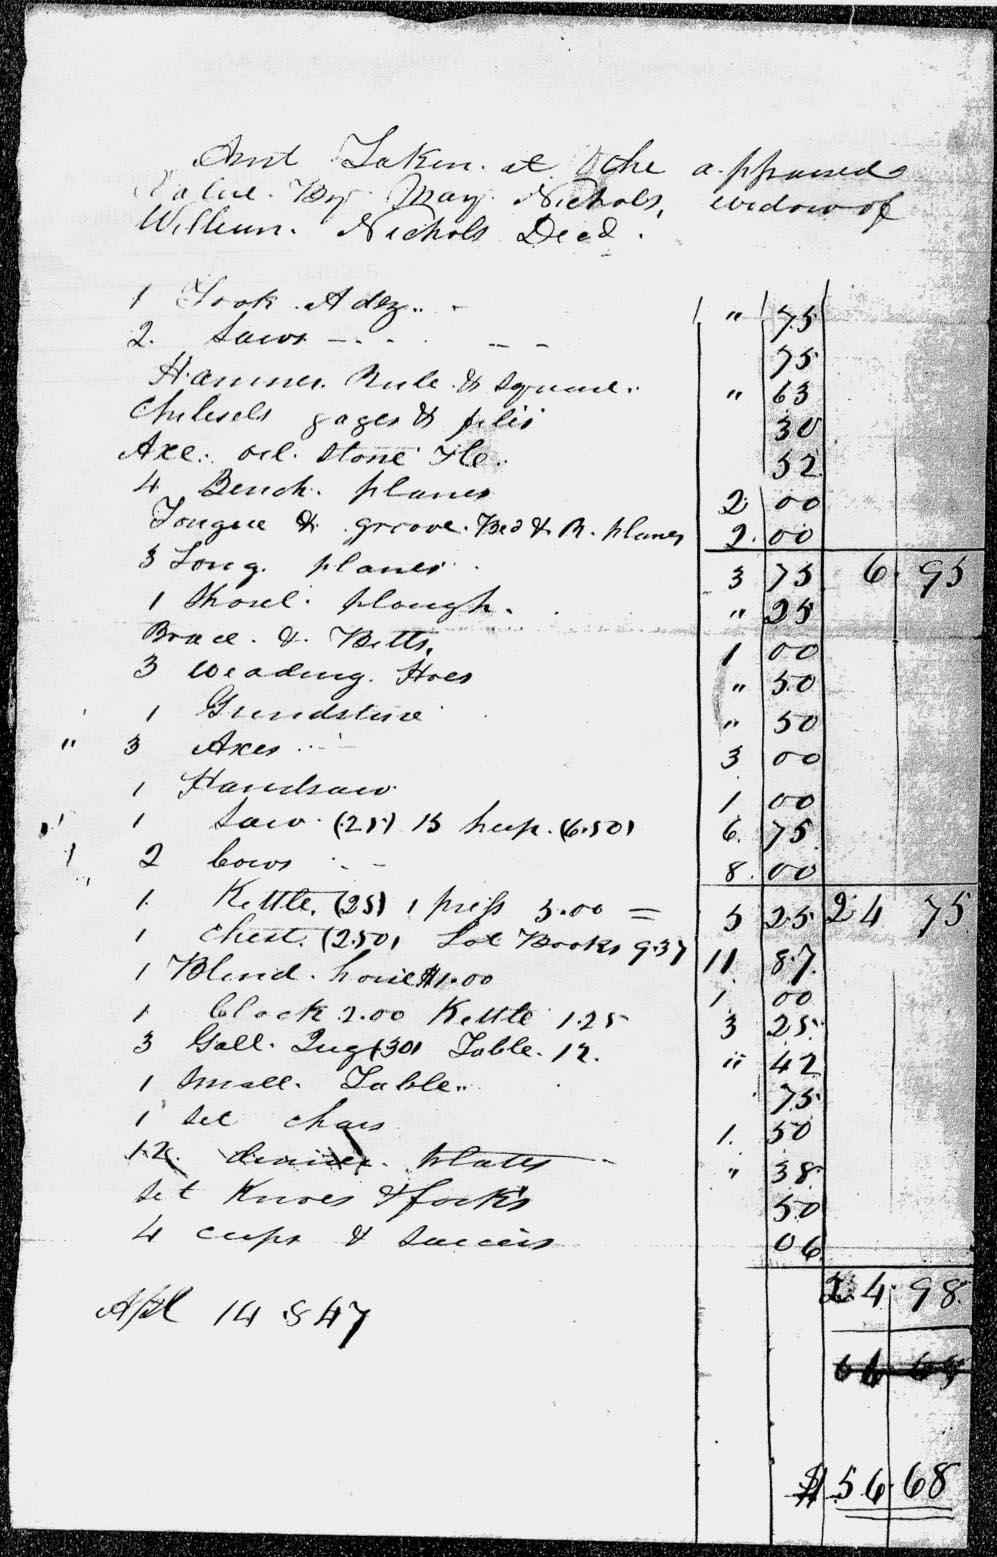 5. After her husband s death, Mary Nichols retained the above listed inventory from his estate, and the remainder of his personal property was sold at public